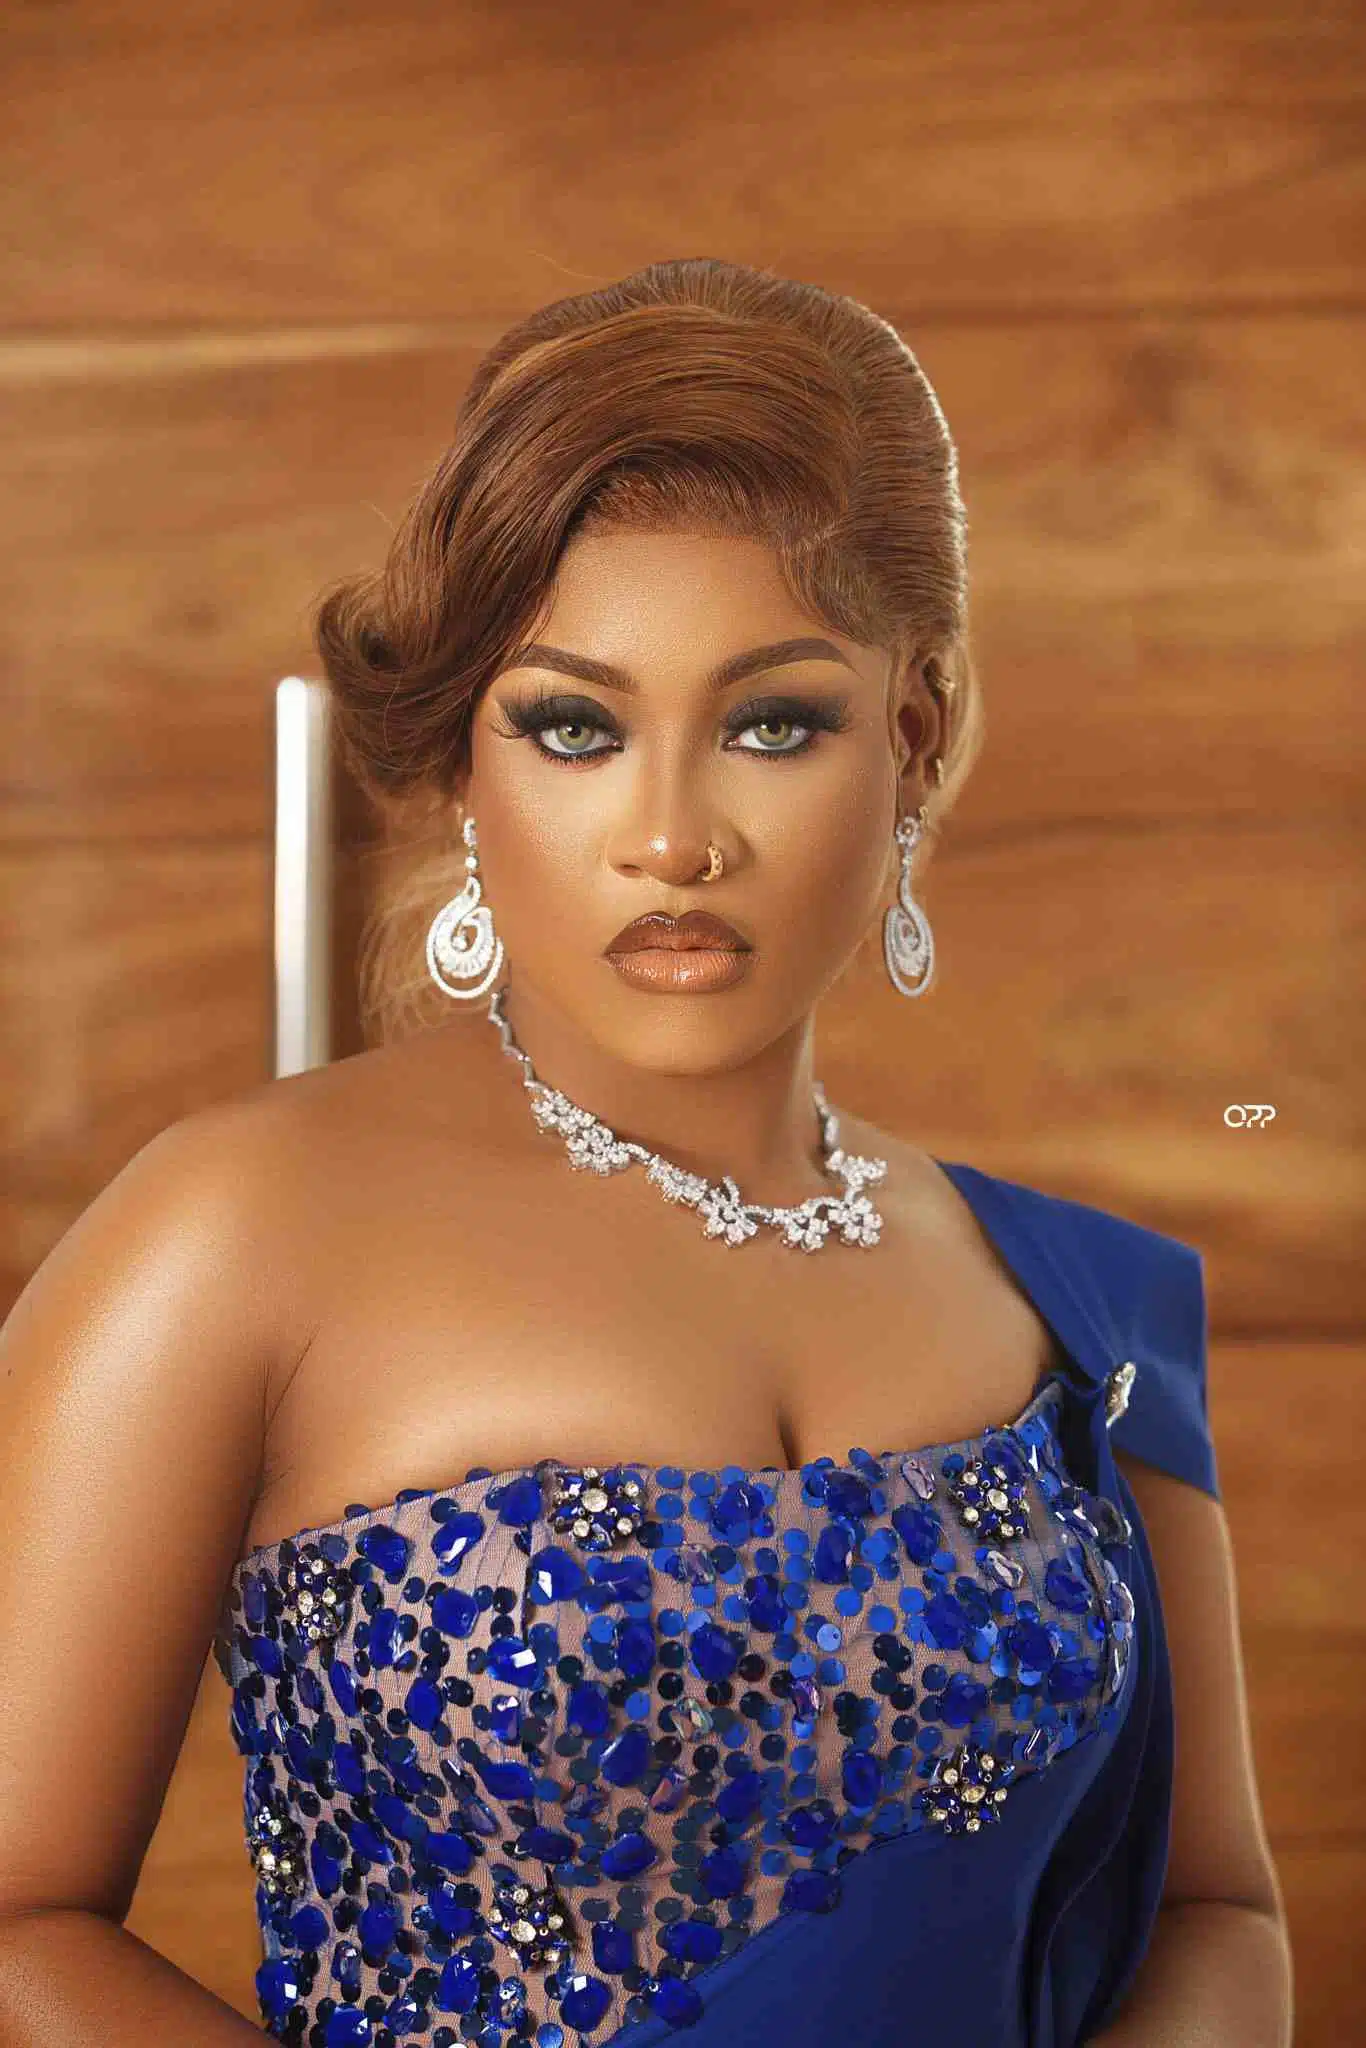 Phyna cries out after being scammed by car dealer